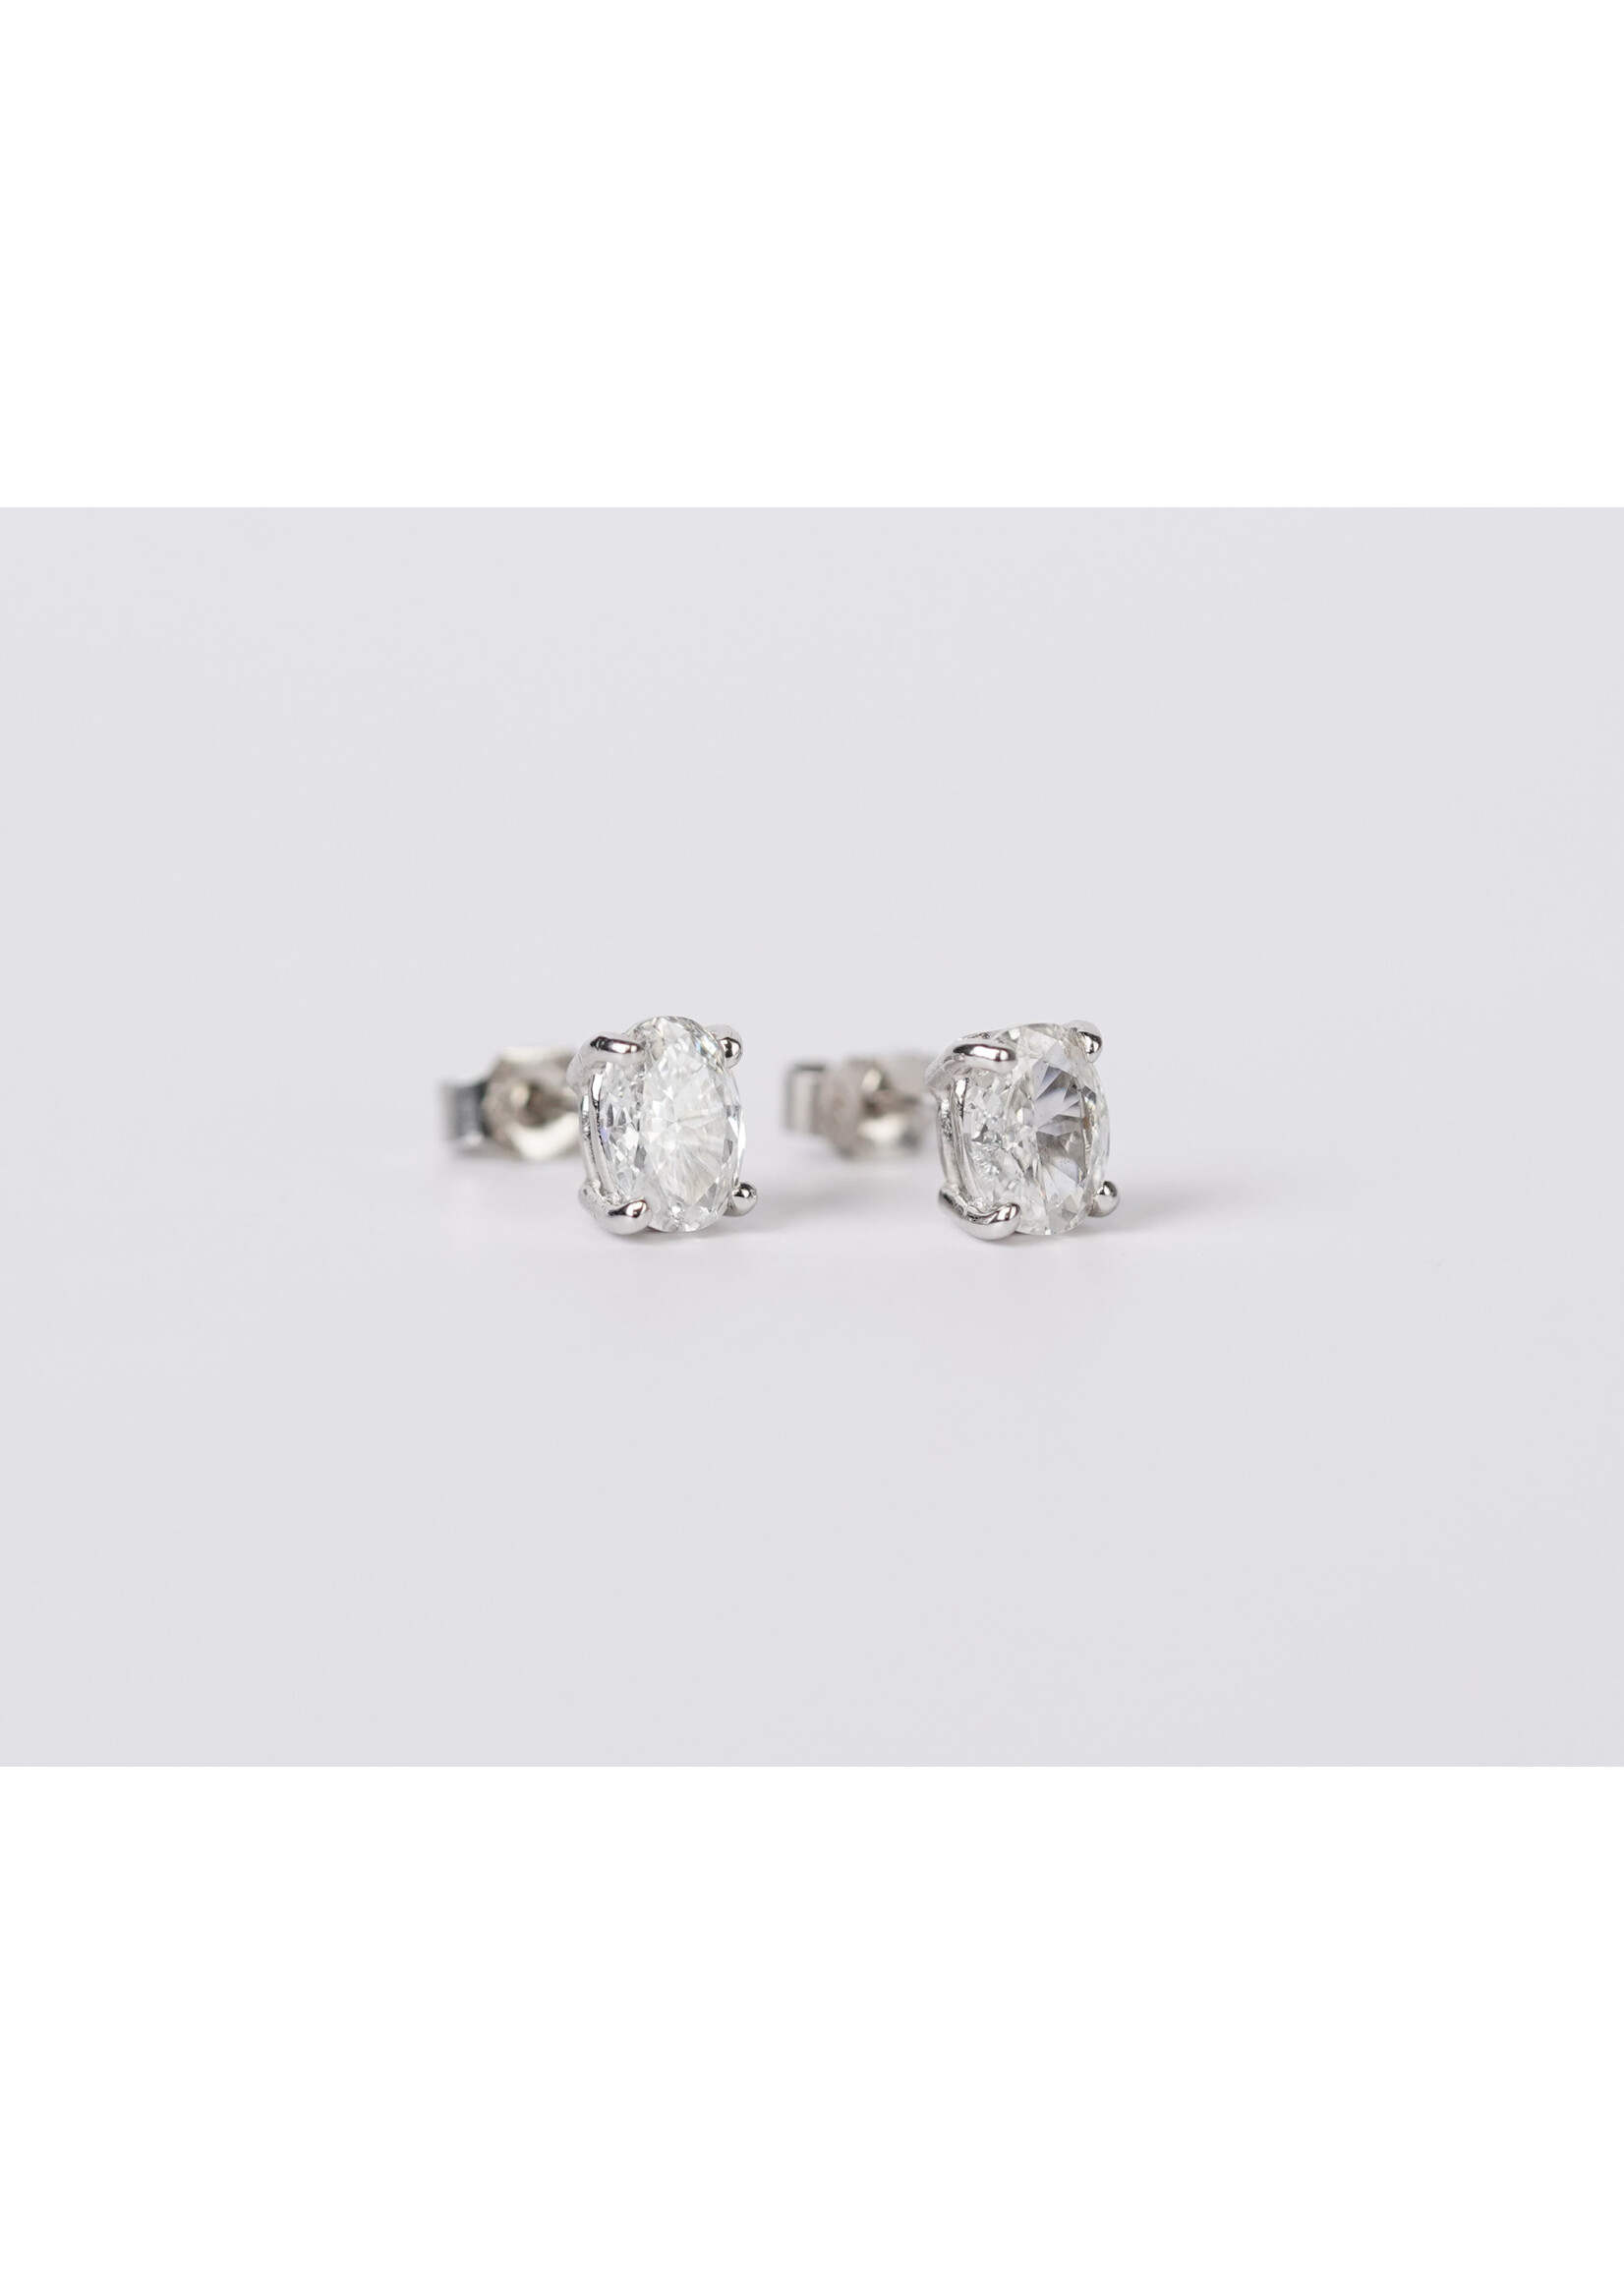 14KW 1.08ctw H-I/SI2 Oval Diamond Solitaire Earrings